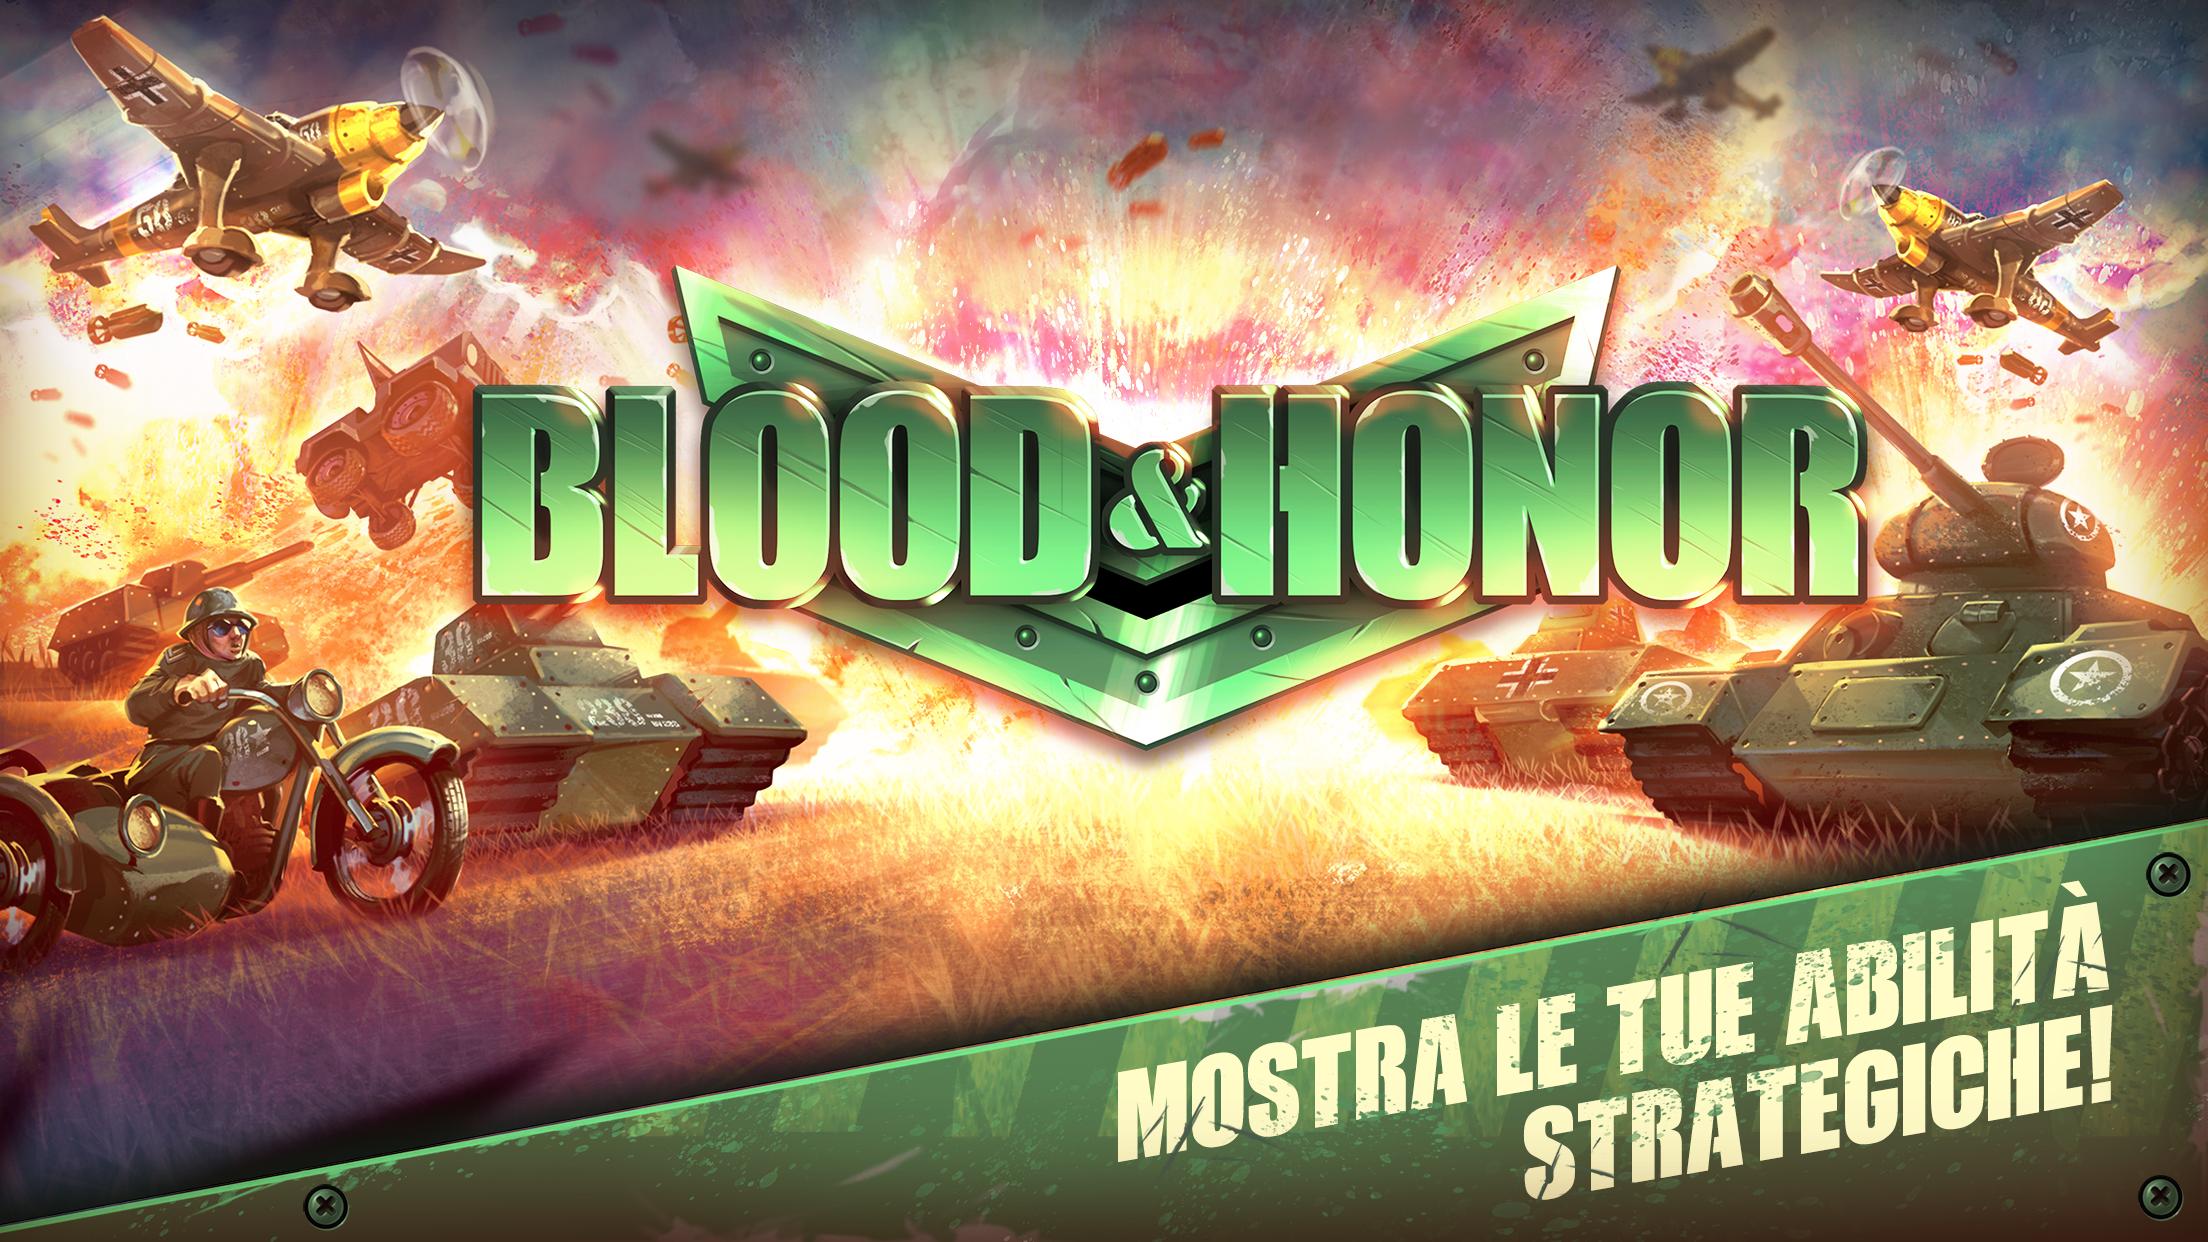 Blood & Honor for Android - APK Download - 